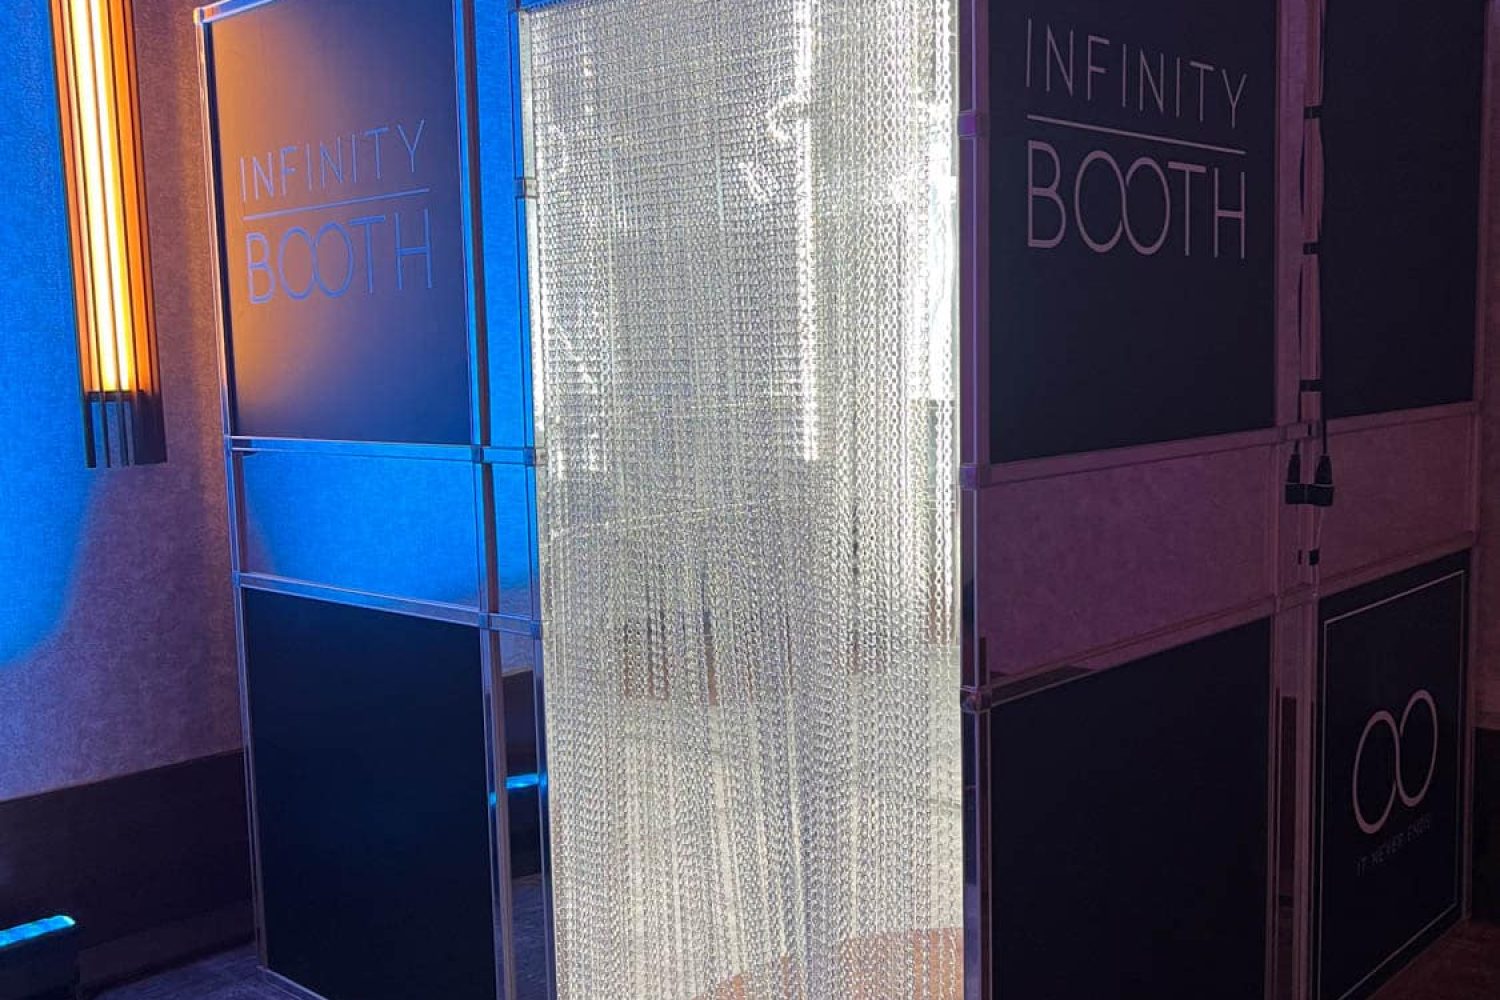 Infinity Booth